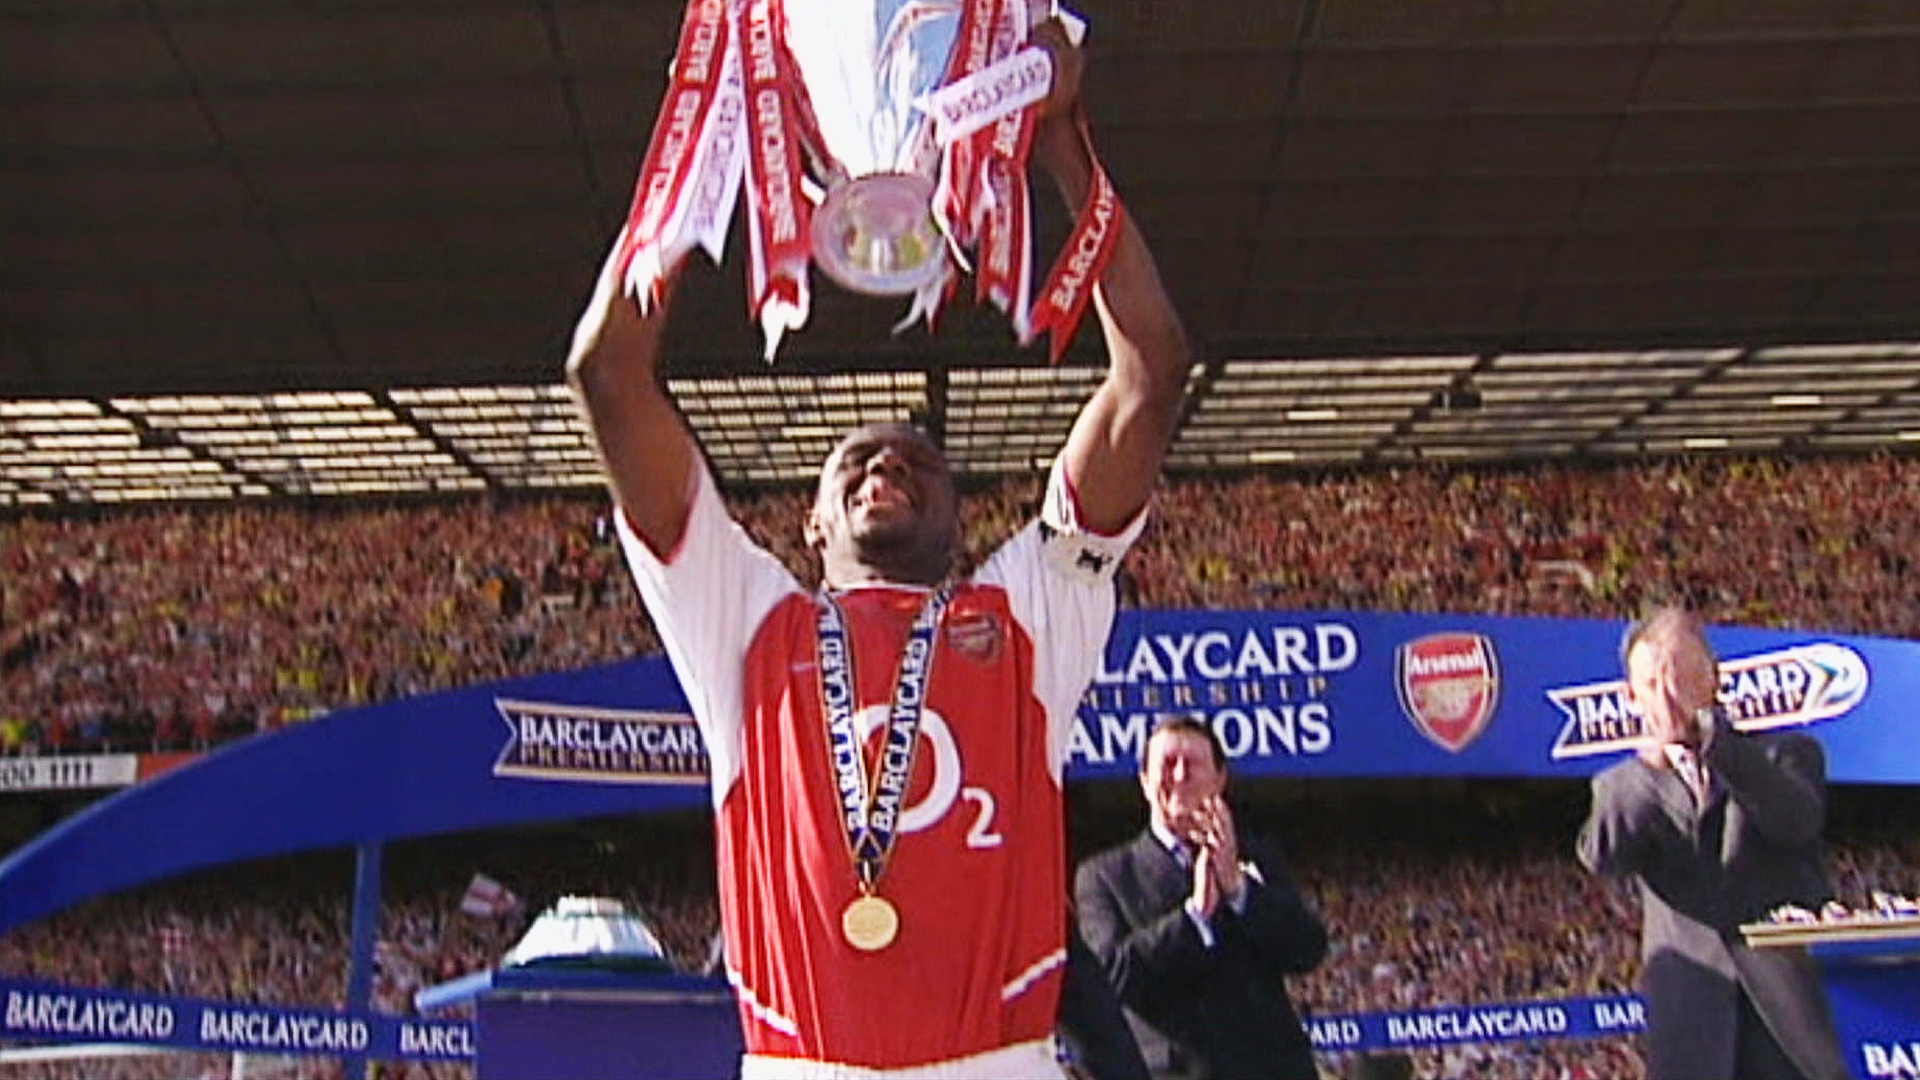 Arsenal Premier League moments: Vieira, Wilshere and more #PLmoments